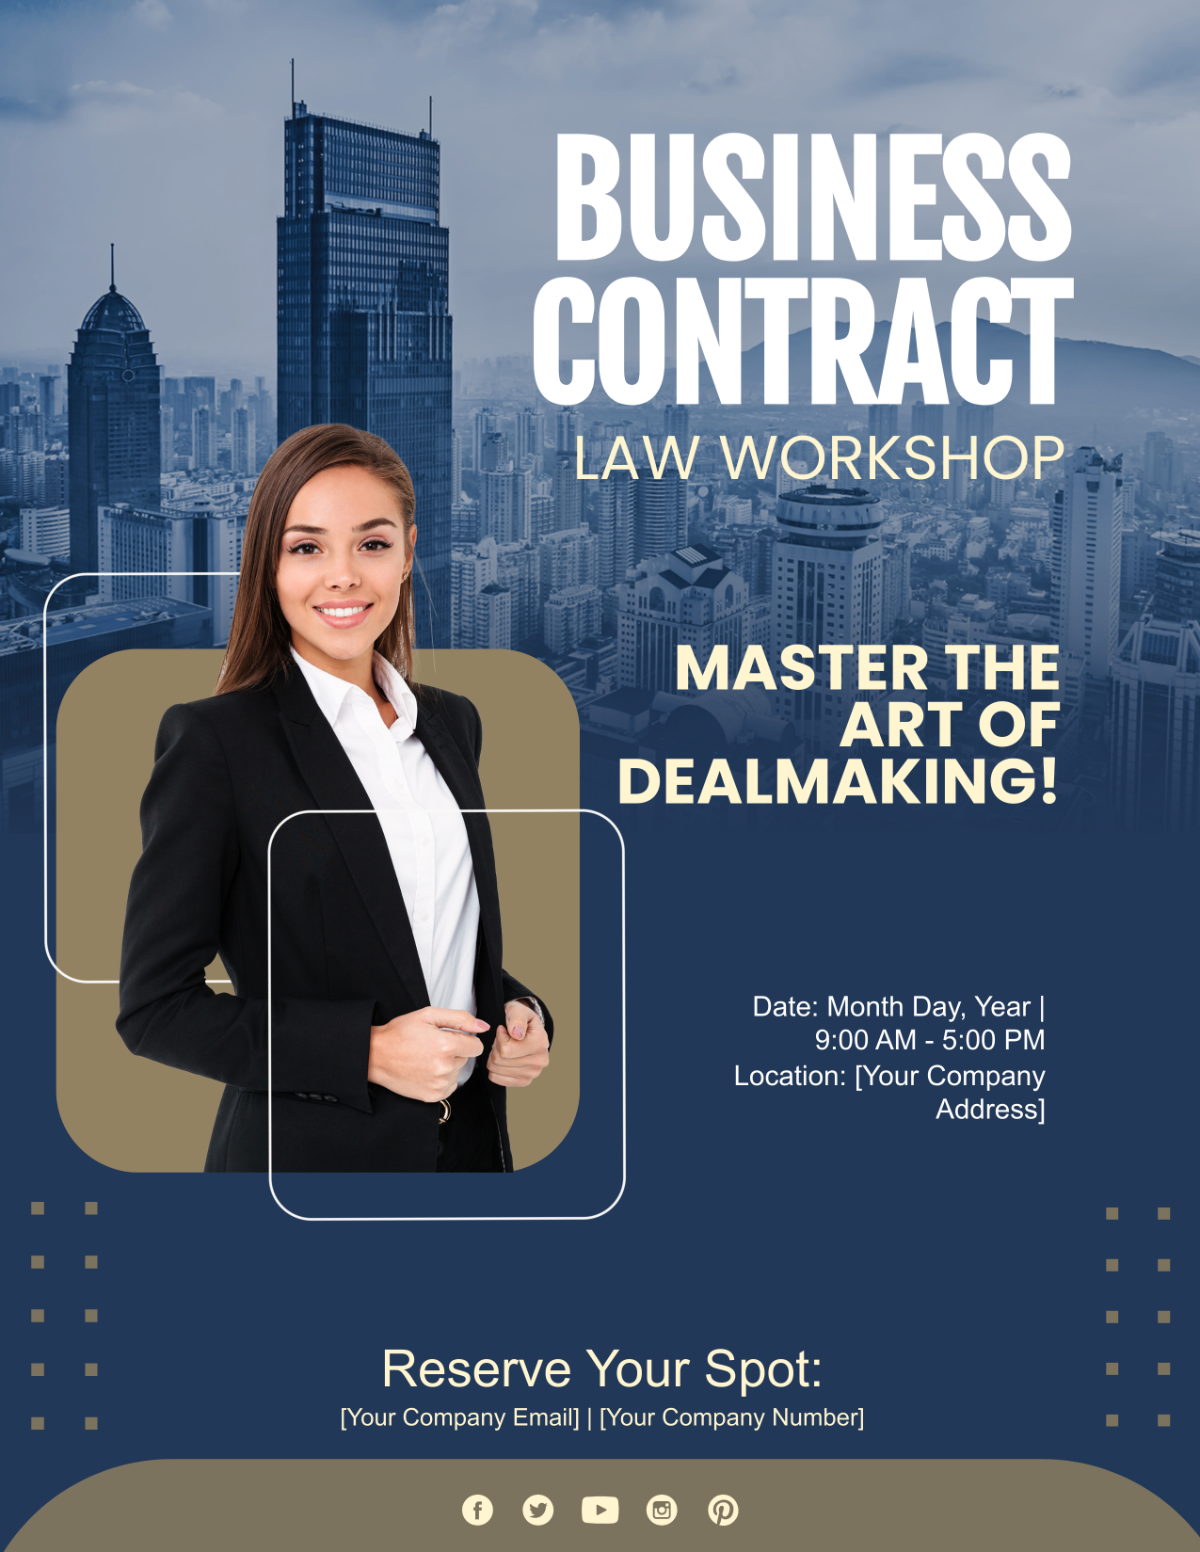 Free Business Contract Law Workshop Flyer Template